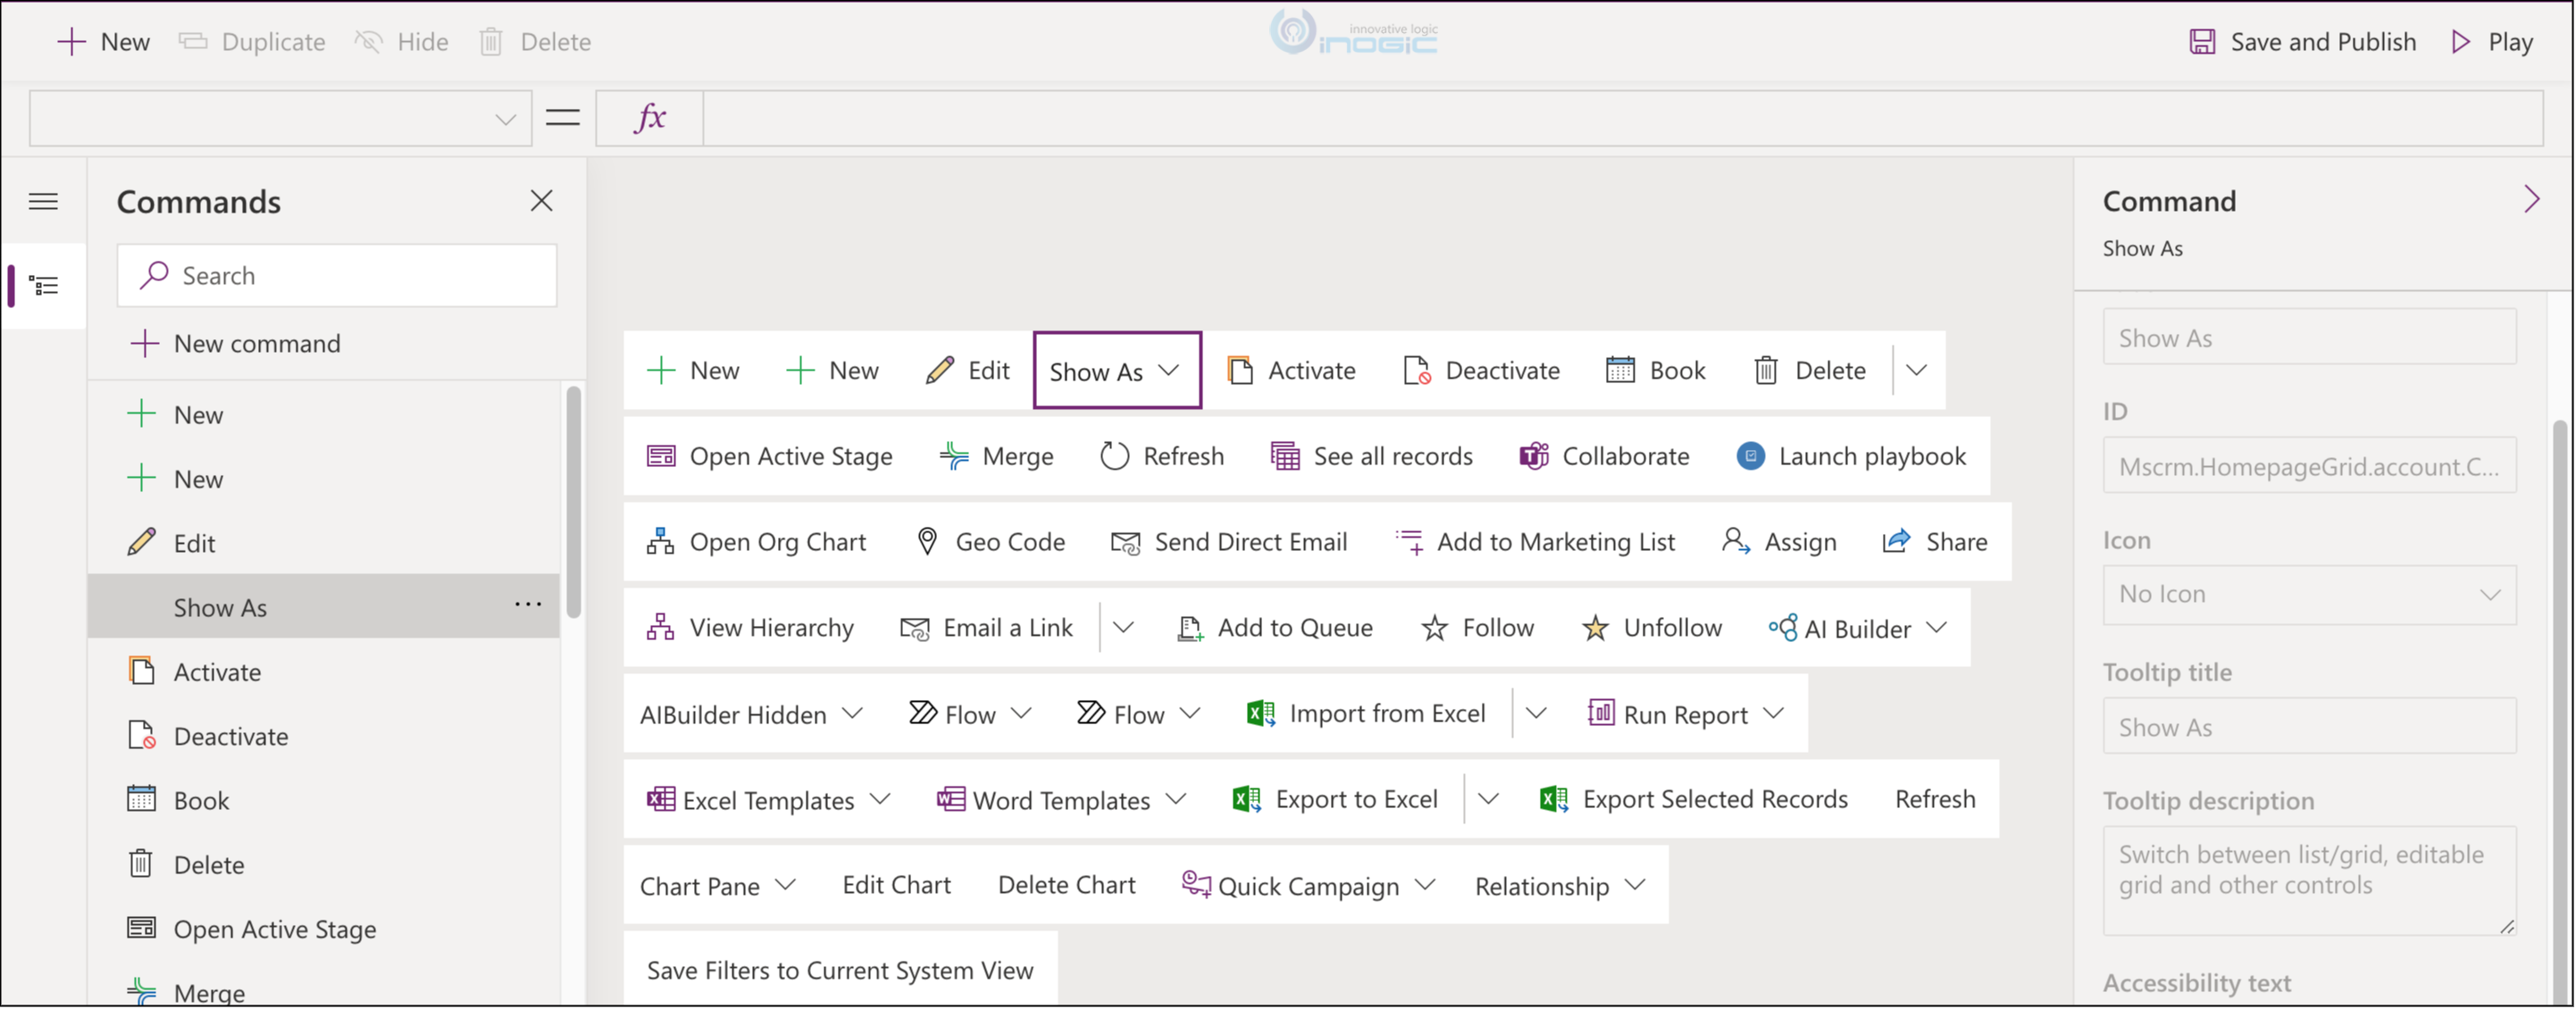 New Command bar designer using PowerFx for Dataverse and Dynamics 365 CRM apps now in Preview